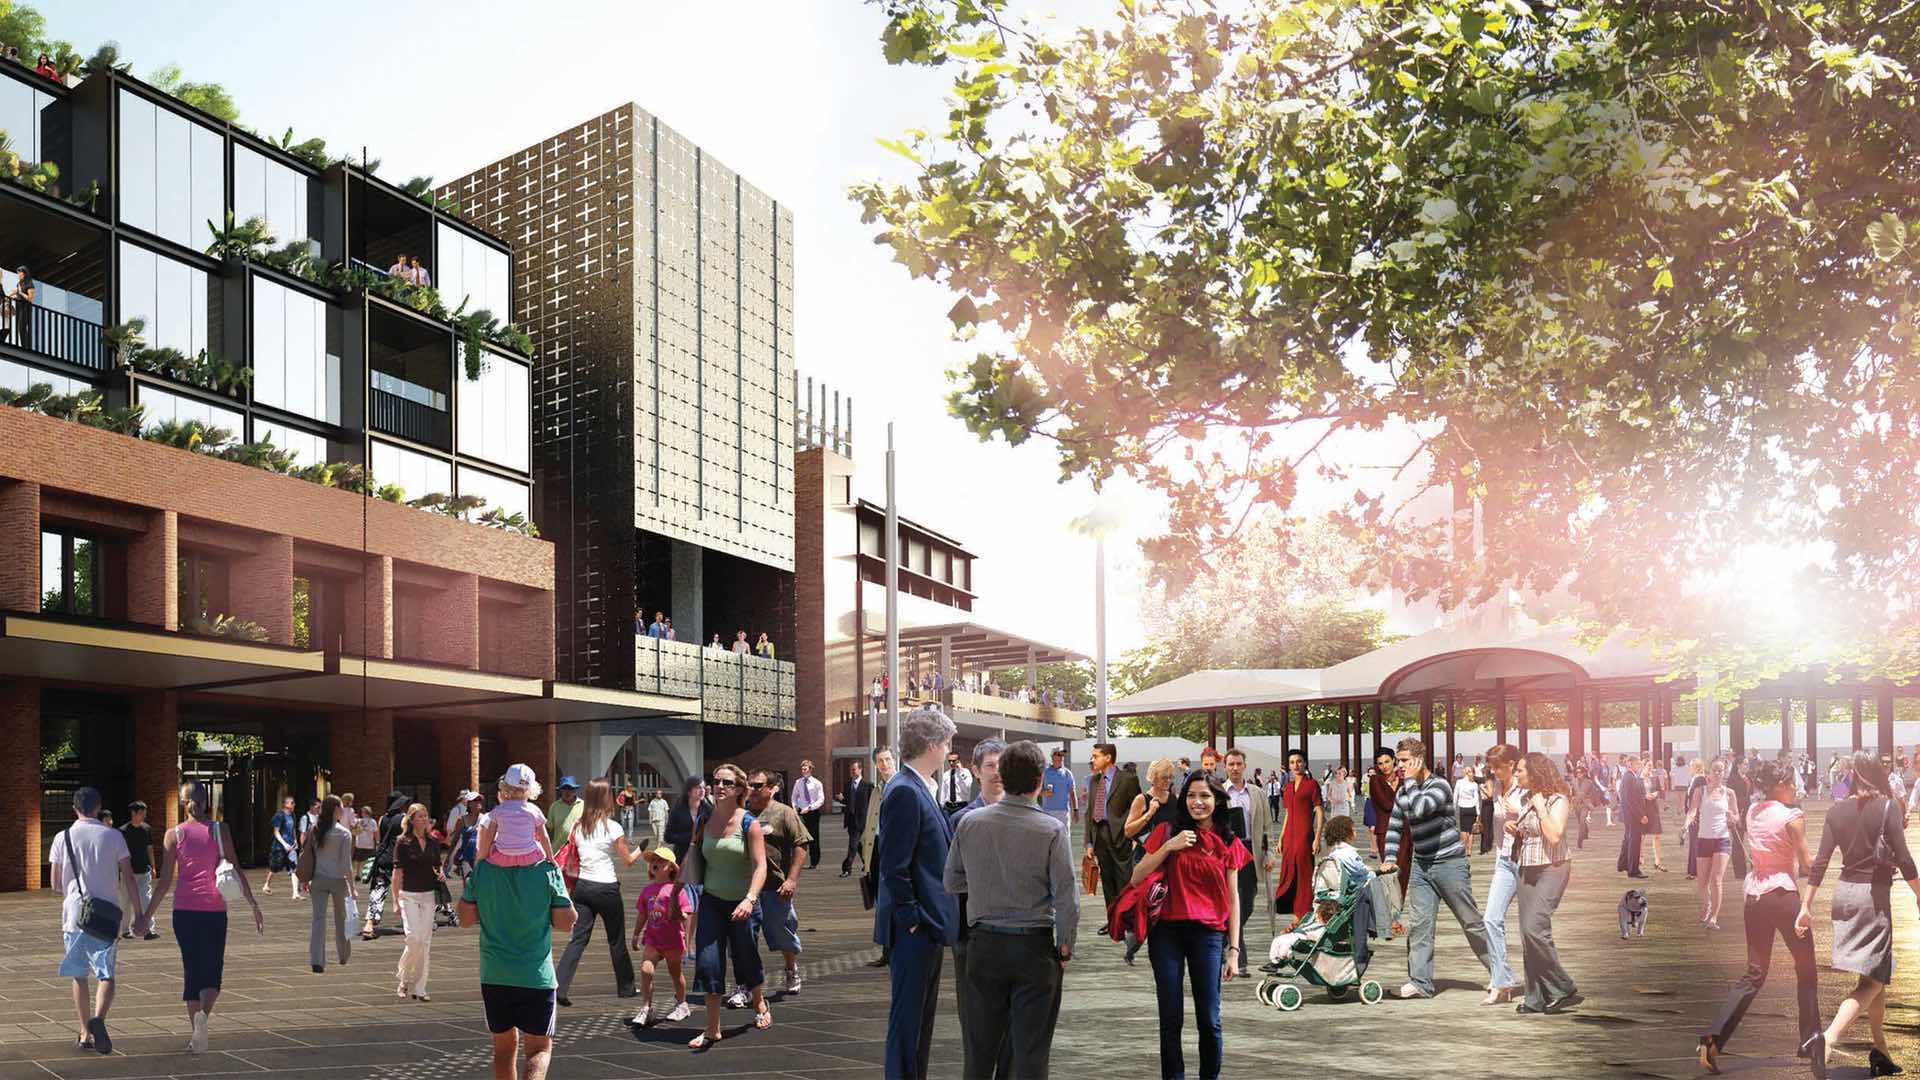 The Queen Victoria Market to Get New Gallery, Artist Spaces and Community Centre